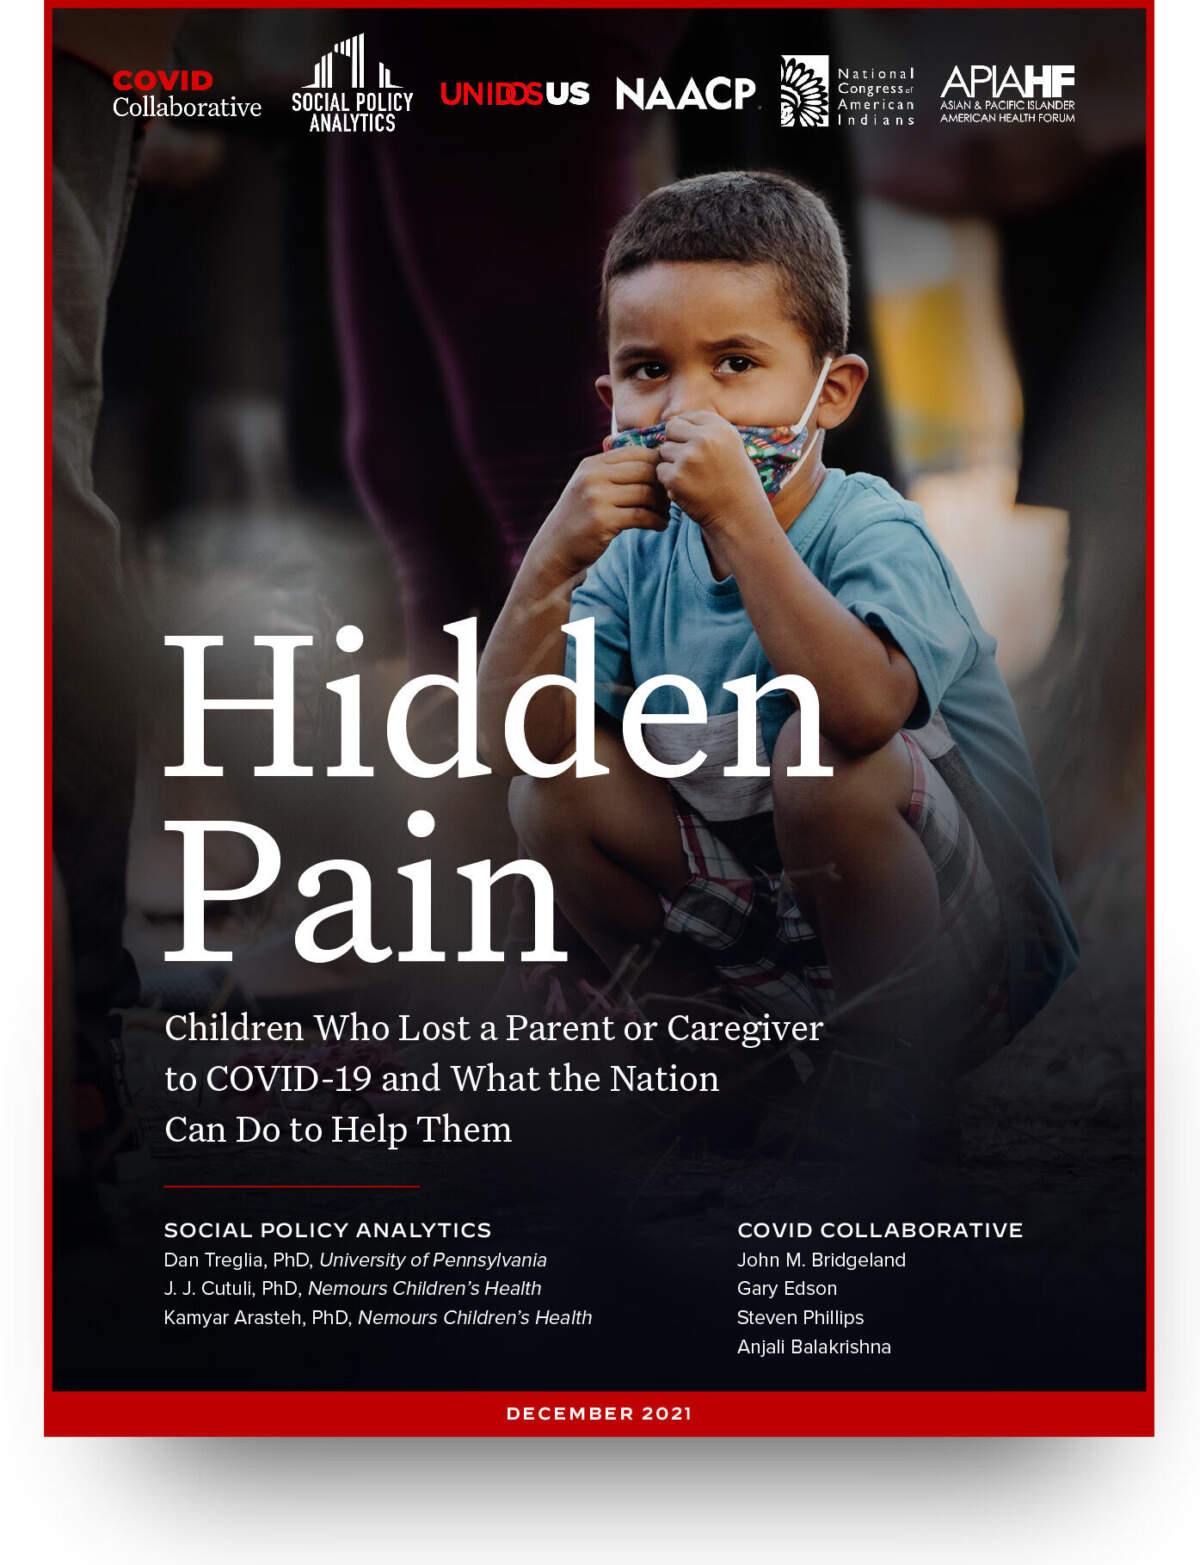 Protecting The Children Of India From The Impact Of COVID-19